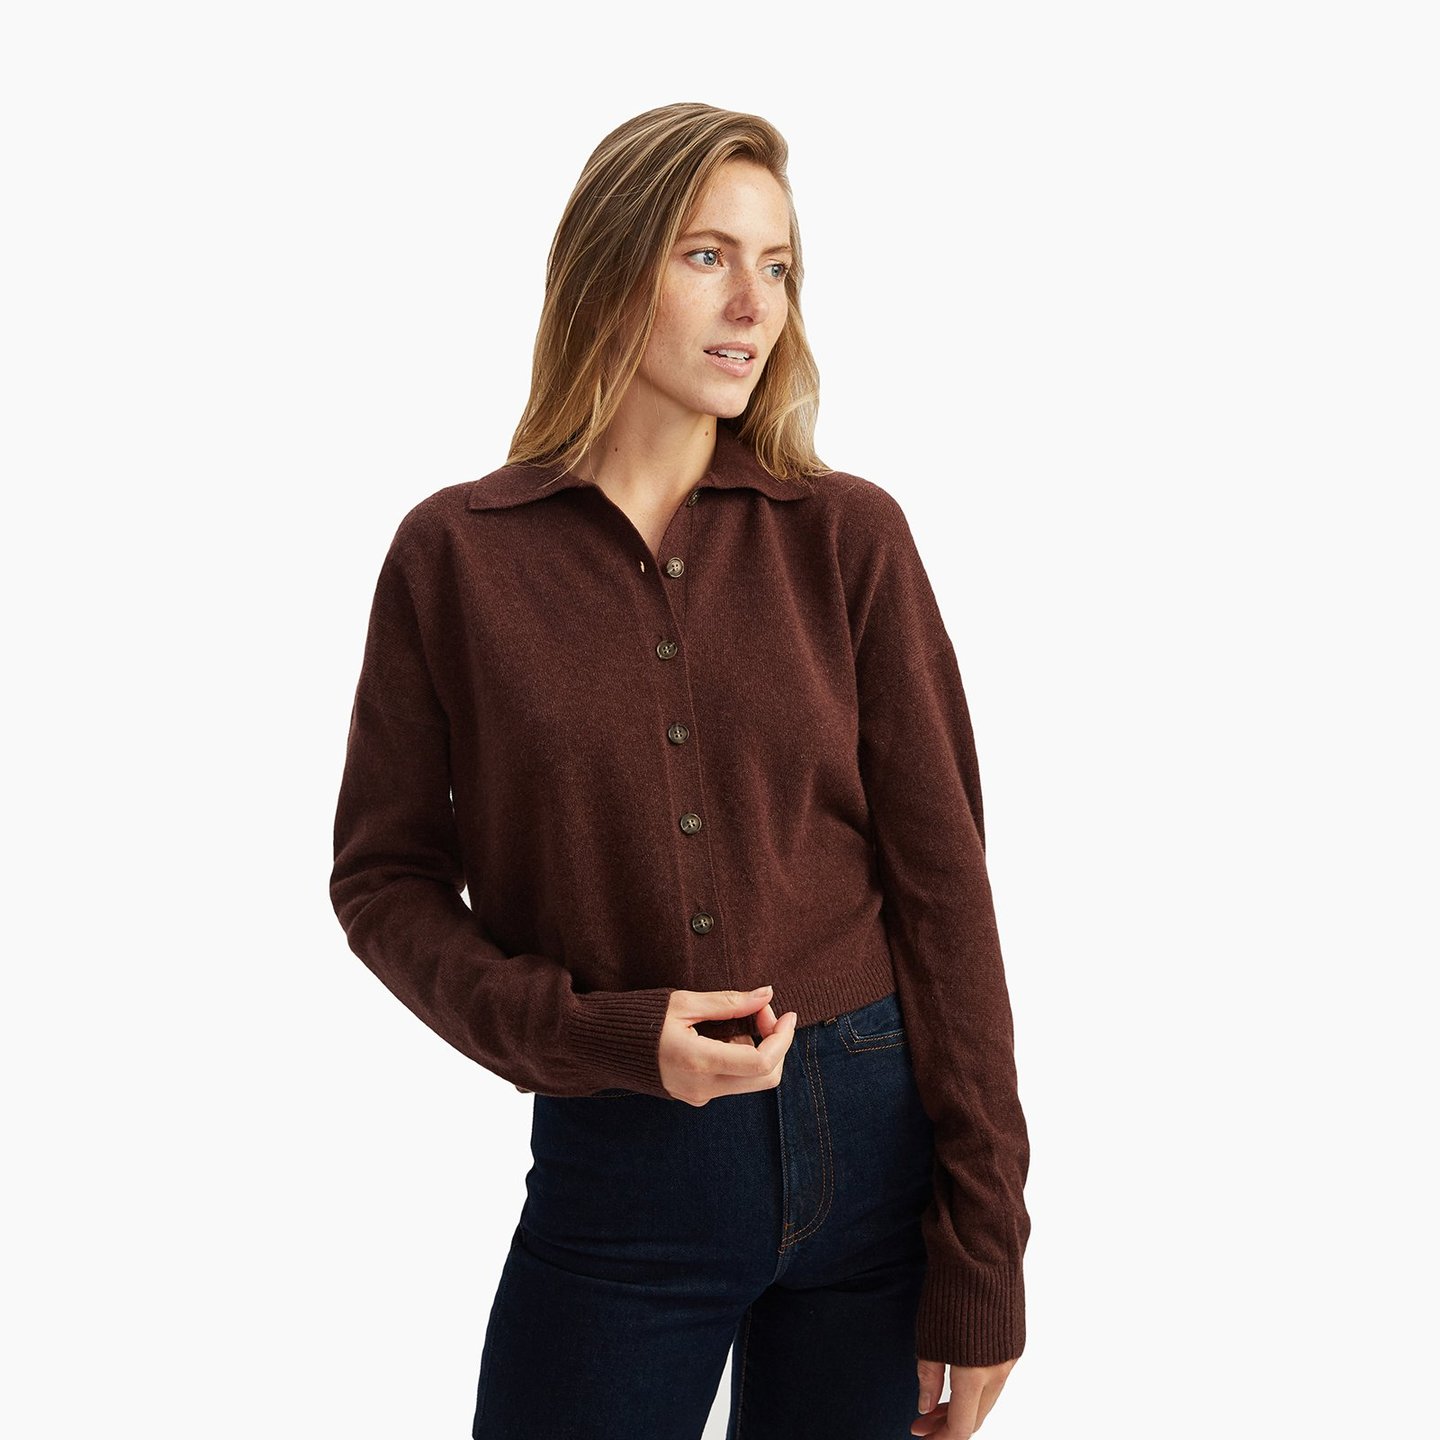 NWET000800_Cashmere_Button_Up_Chocolate_Brown_004_1440x.jpg